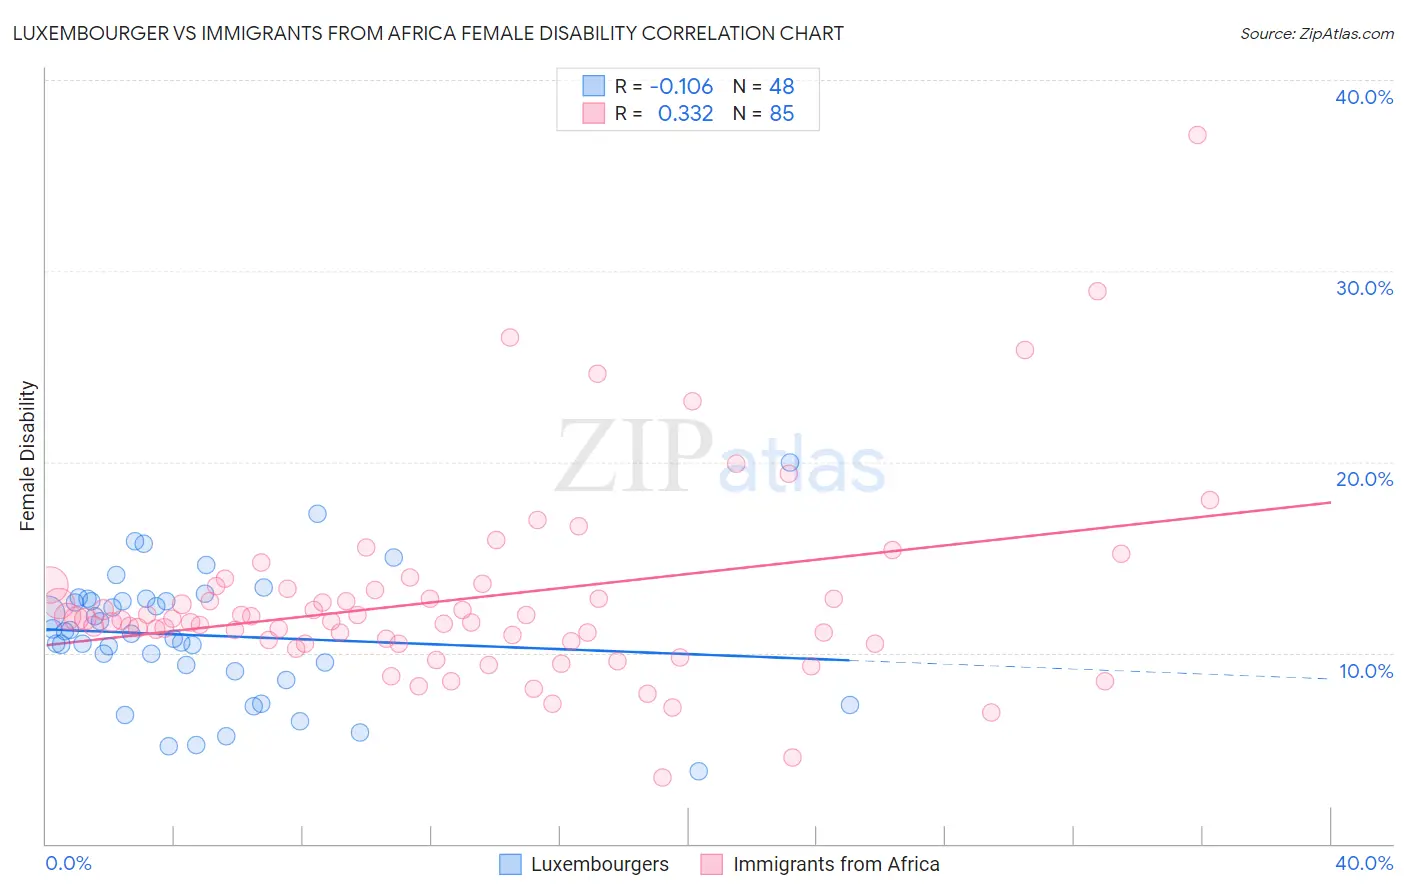 Luxembourger vs Immigrants from Africa Female Disability